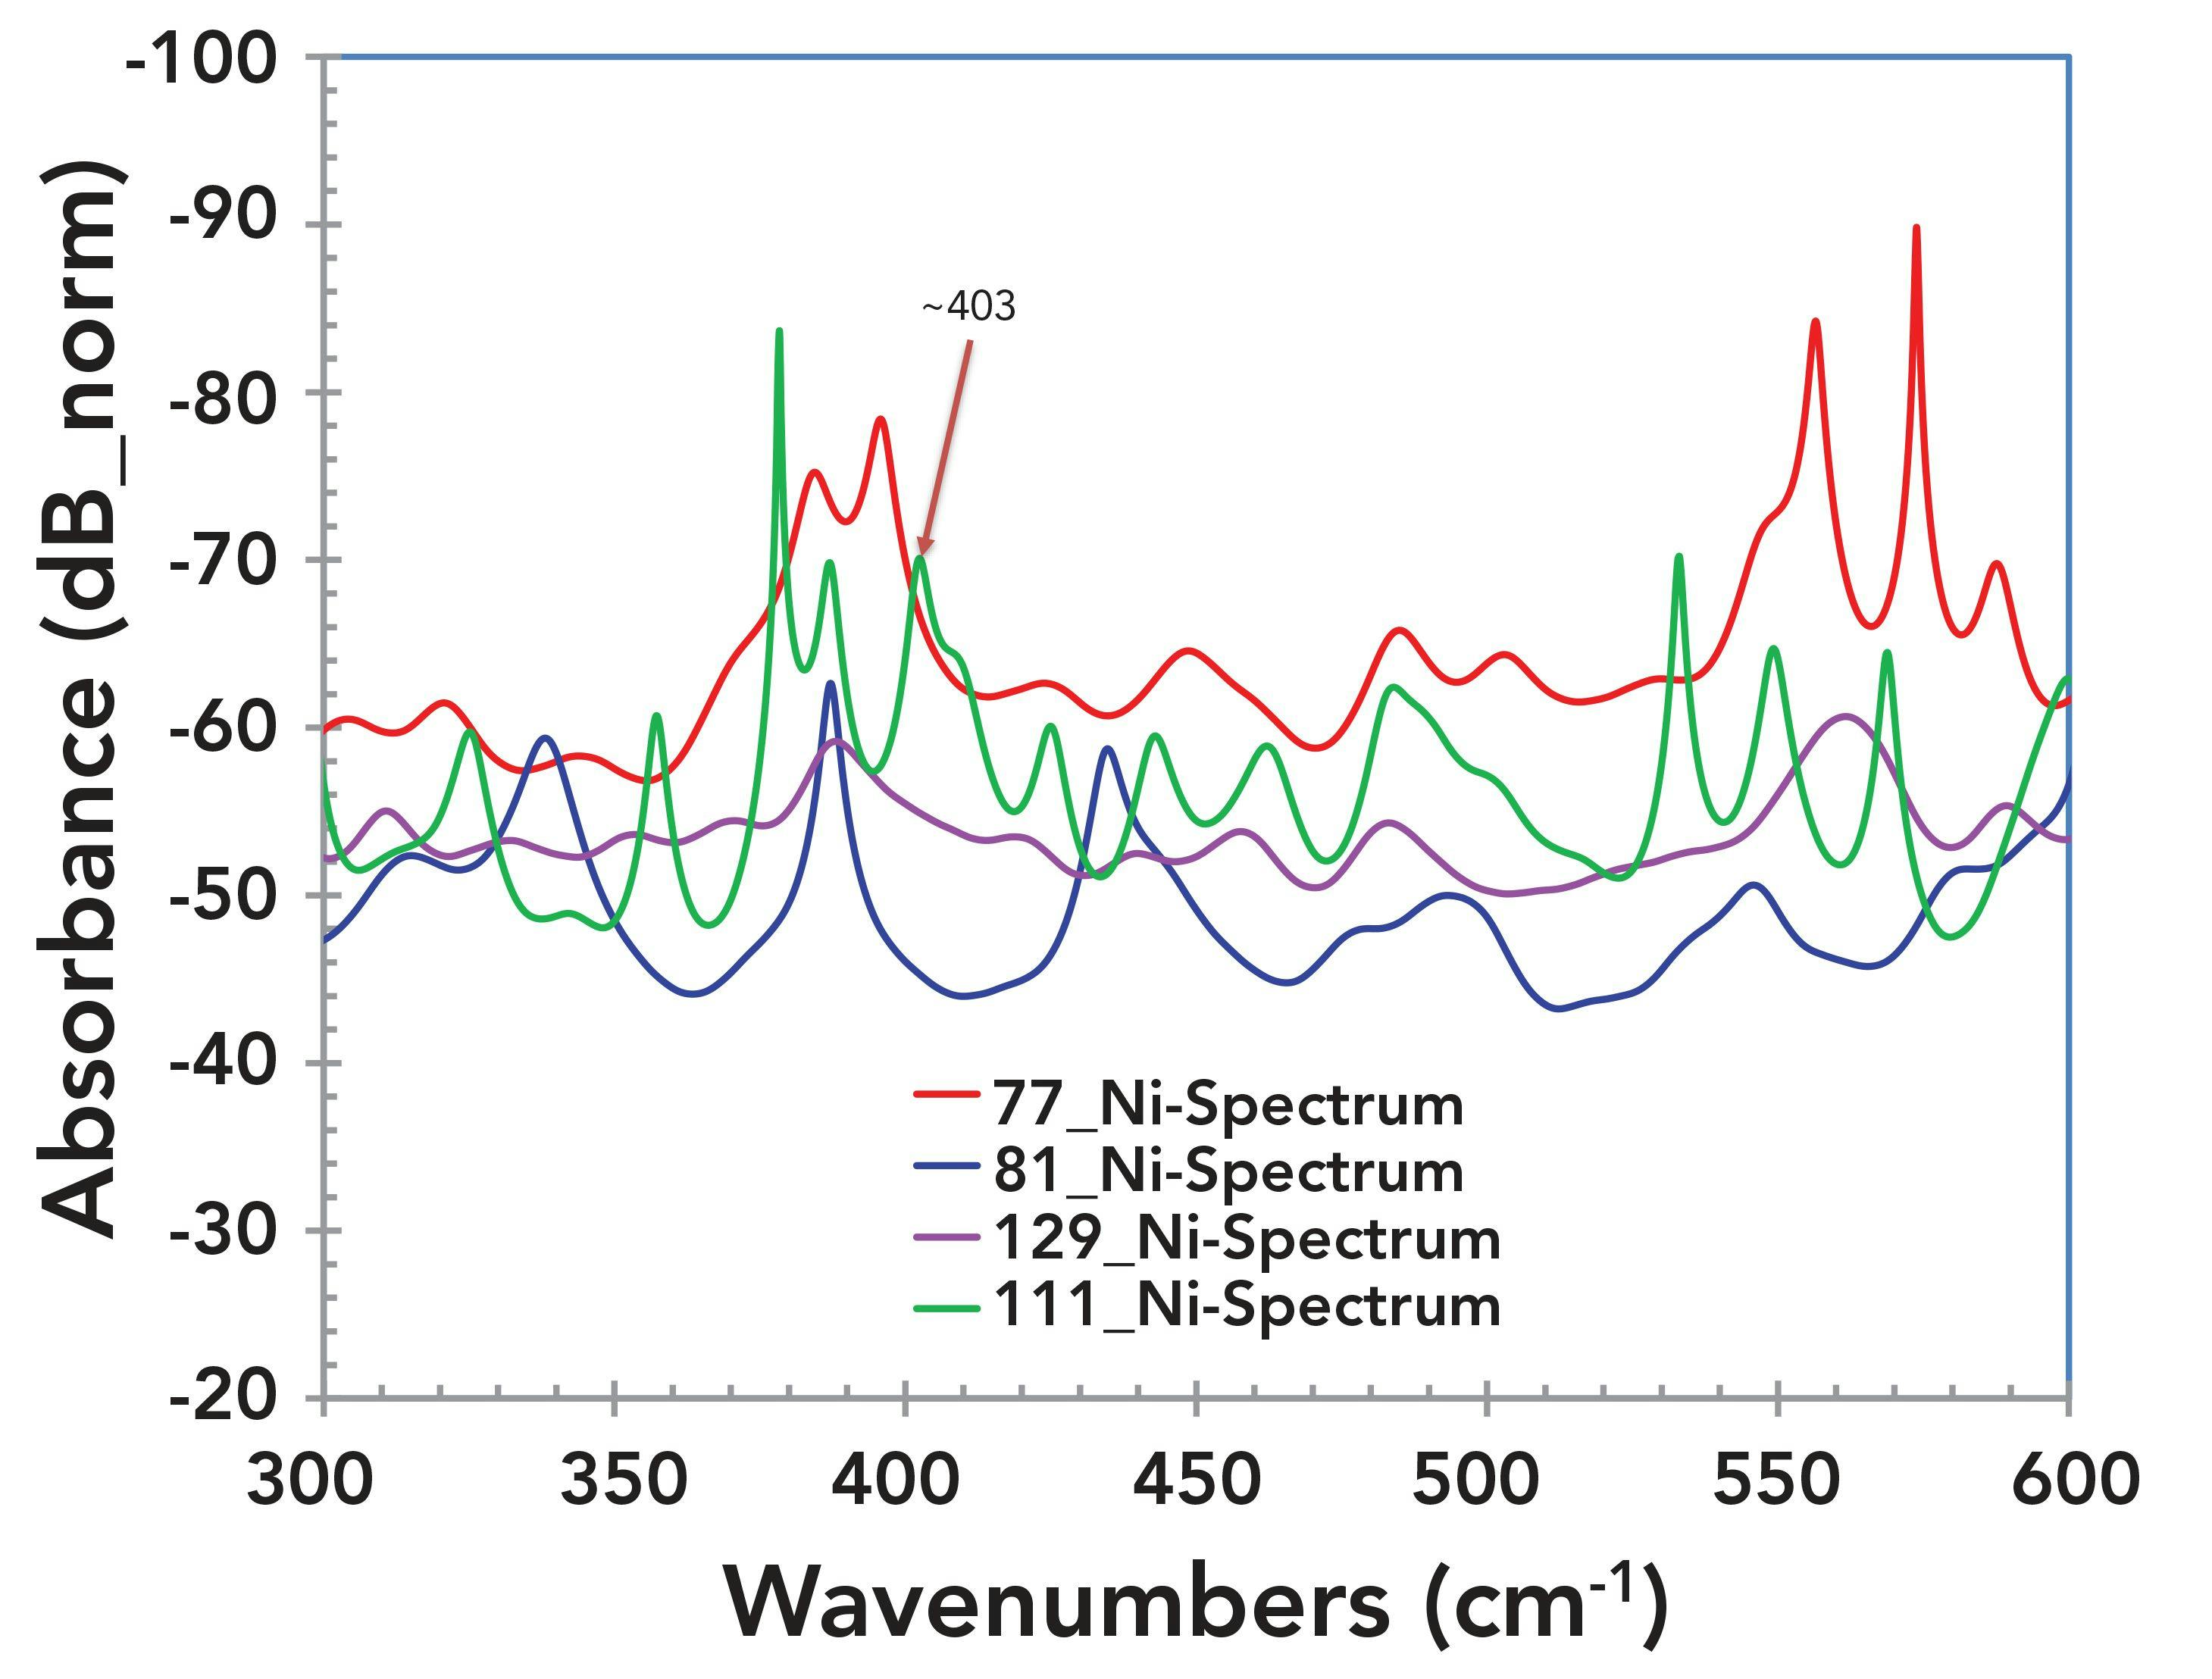 FIGURE 9: Enlarged image of Figure 7. Absorbance spectra of four samples from the nickel rich area from 300 cm-1 to 600 cm-1. The peaks at 403 cm-1 have been reported for NiO (2).